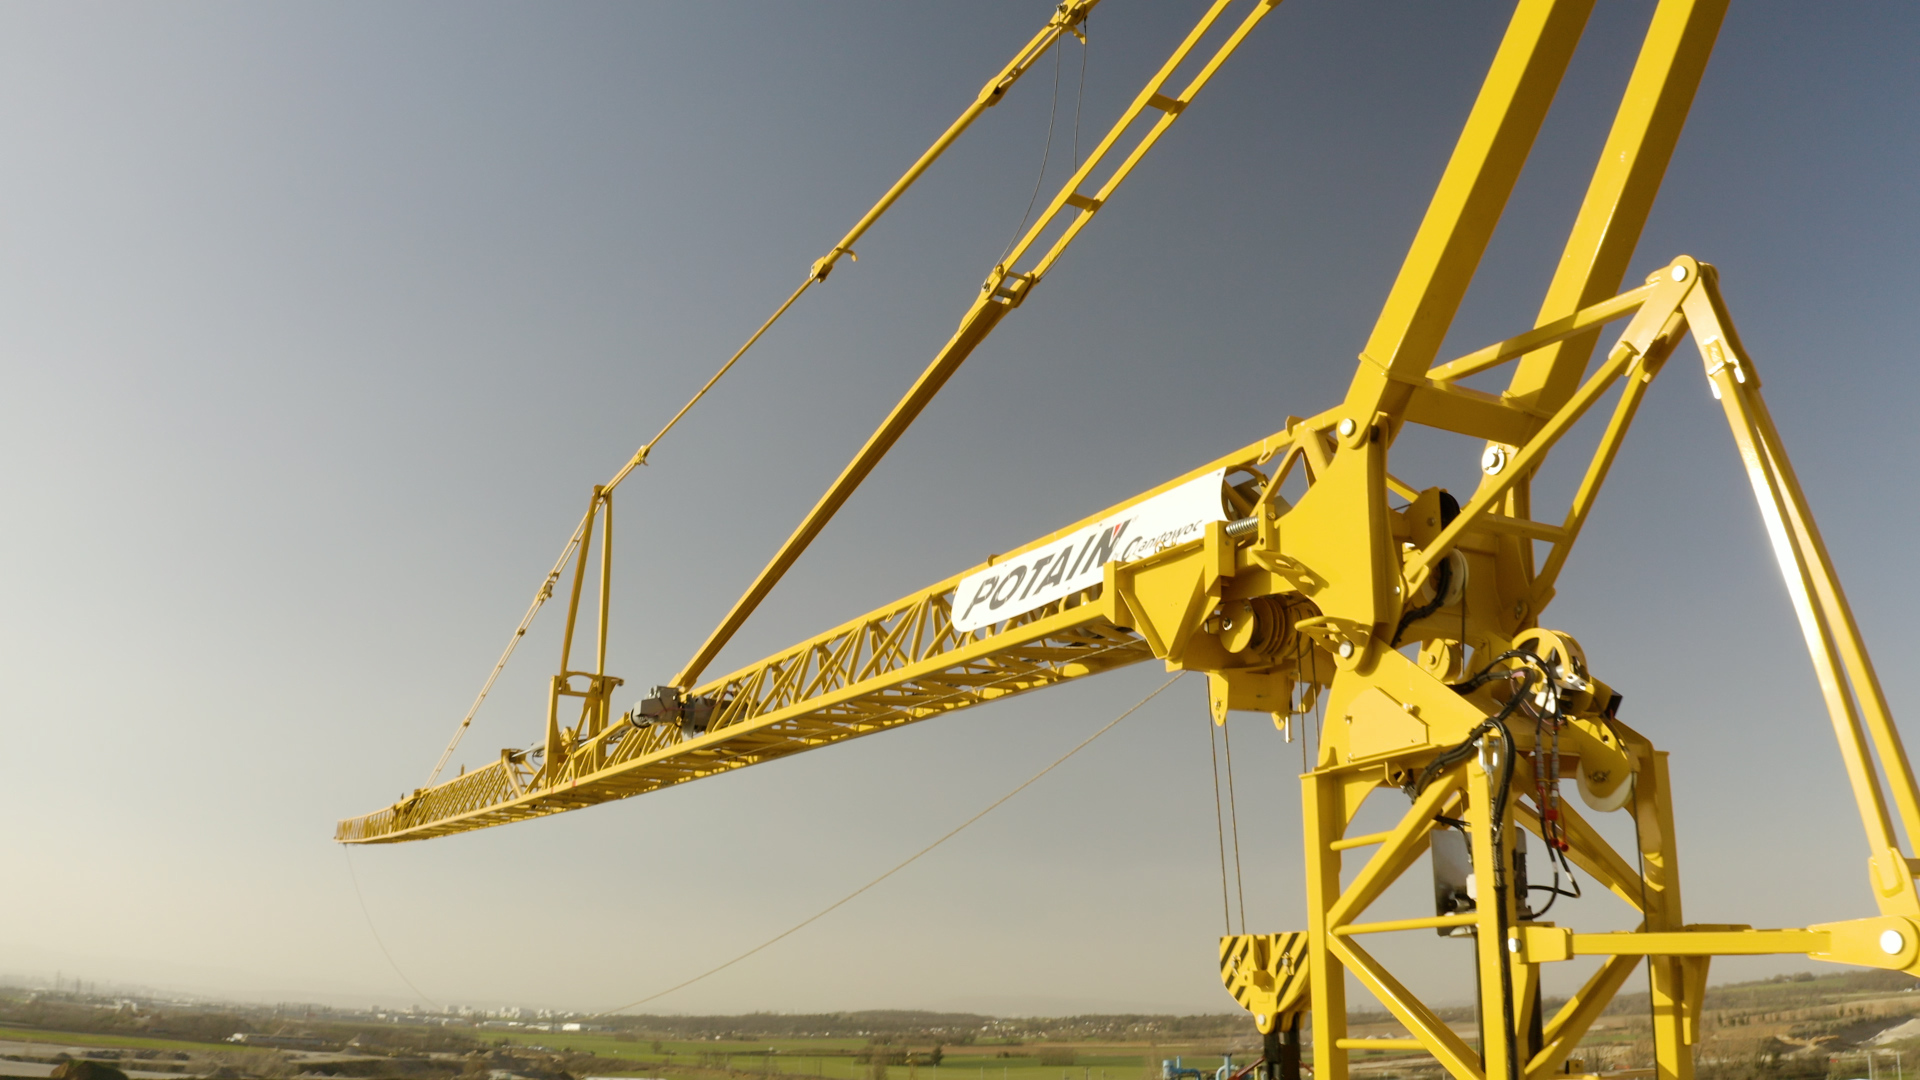 Potain-introduces-the-new-Igo-T-99-self-erecting-crane-with-improved-reach-and-capacity-from-a-compact-footprint-3_0